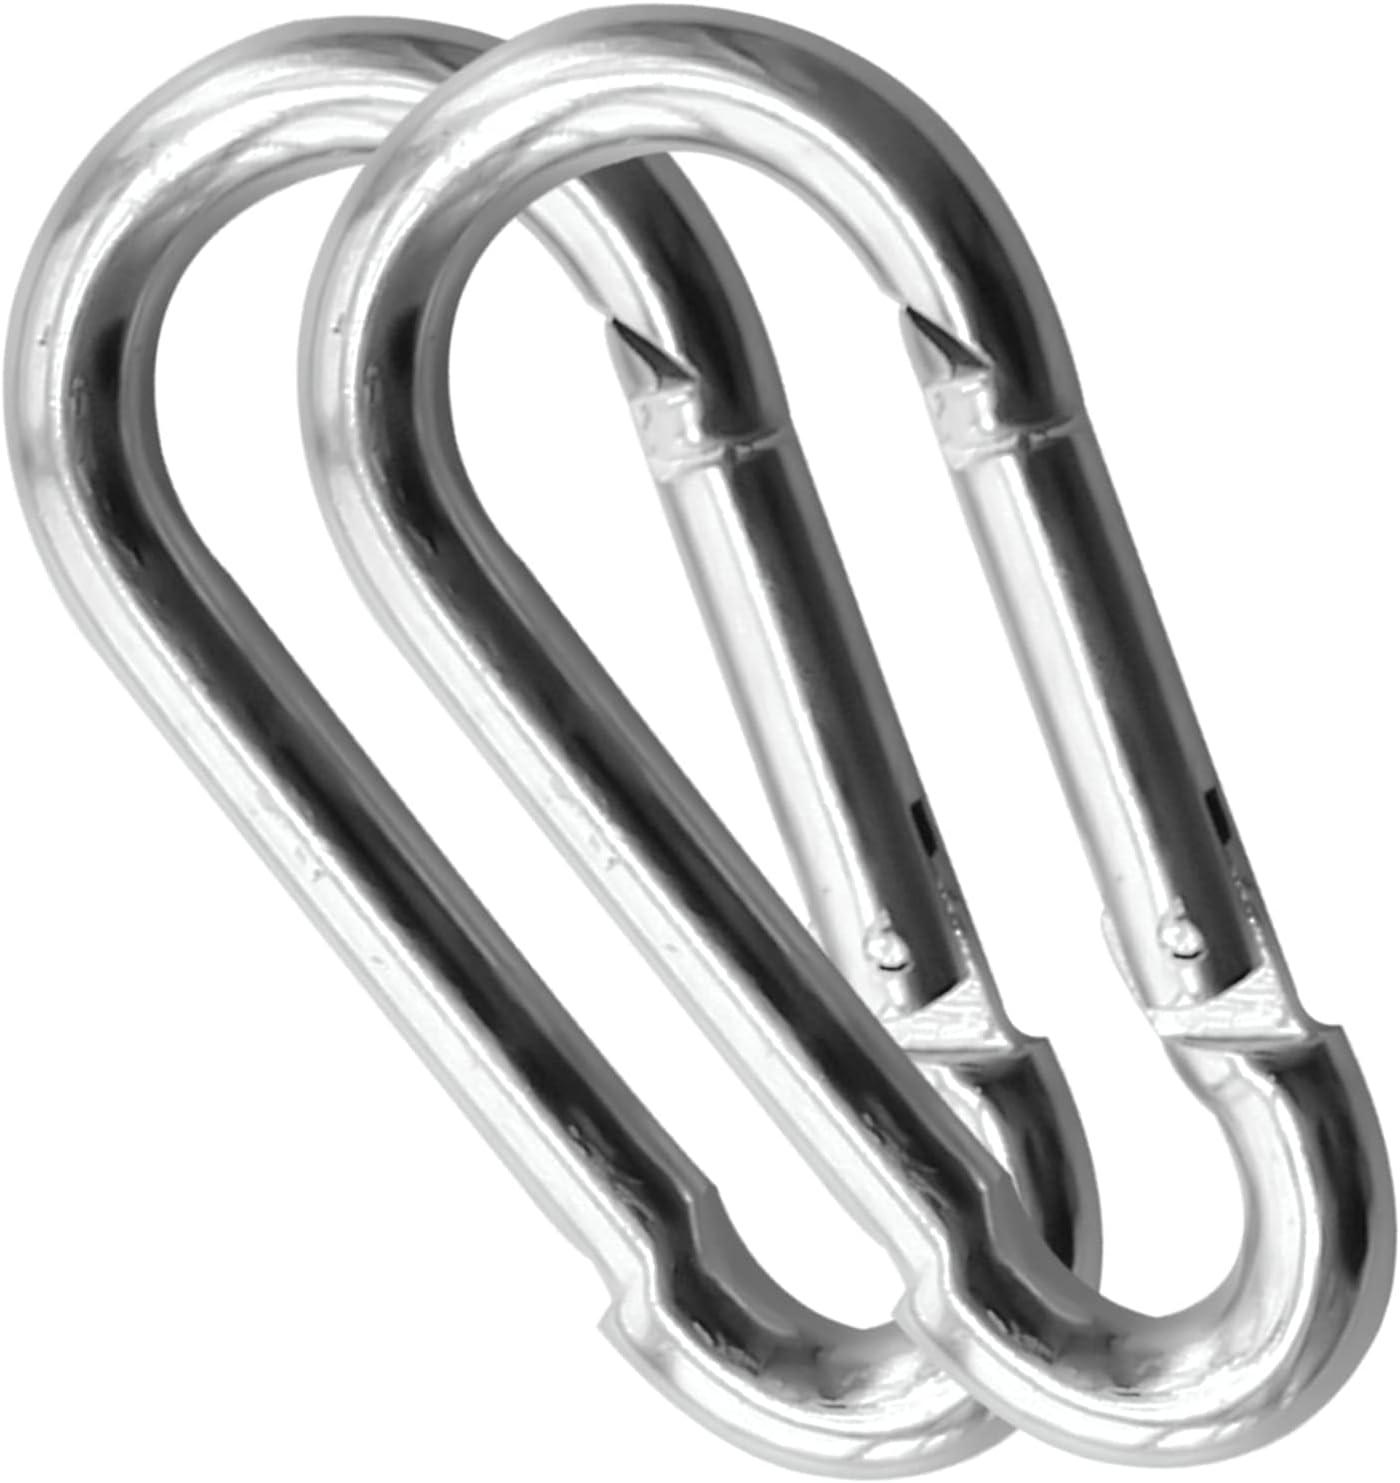 Stainless Steel Spring Snap Hook Carabiner M6 M8 M10 Heavy Duty Carabiner  Clip Spring Clips Keychain 5/16 Inch Quick Links for Backpack, Hammocks